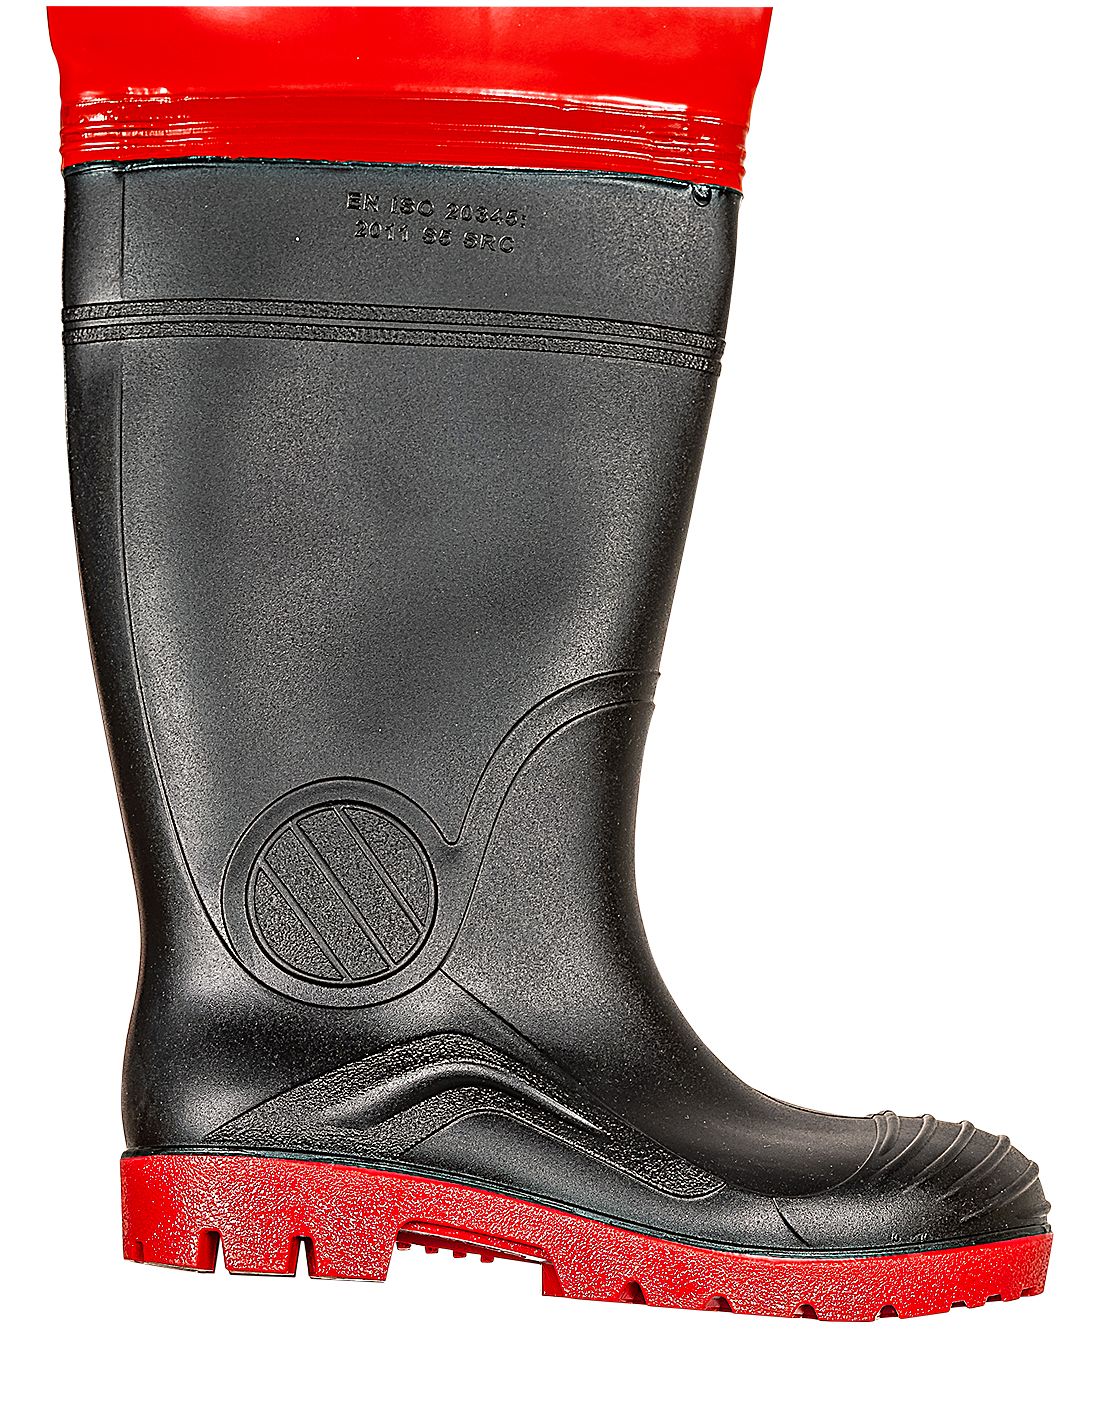 Thigh Waders STRONG - Red - PROS